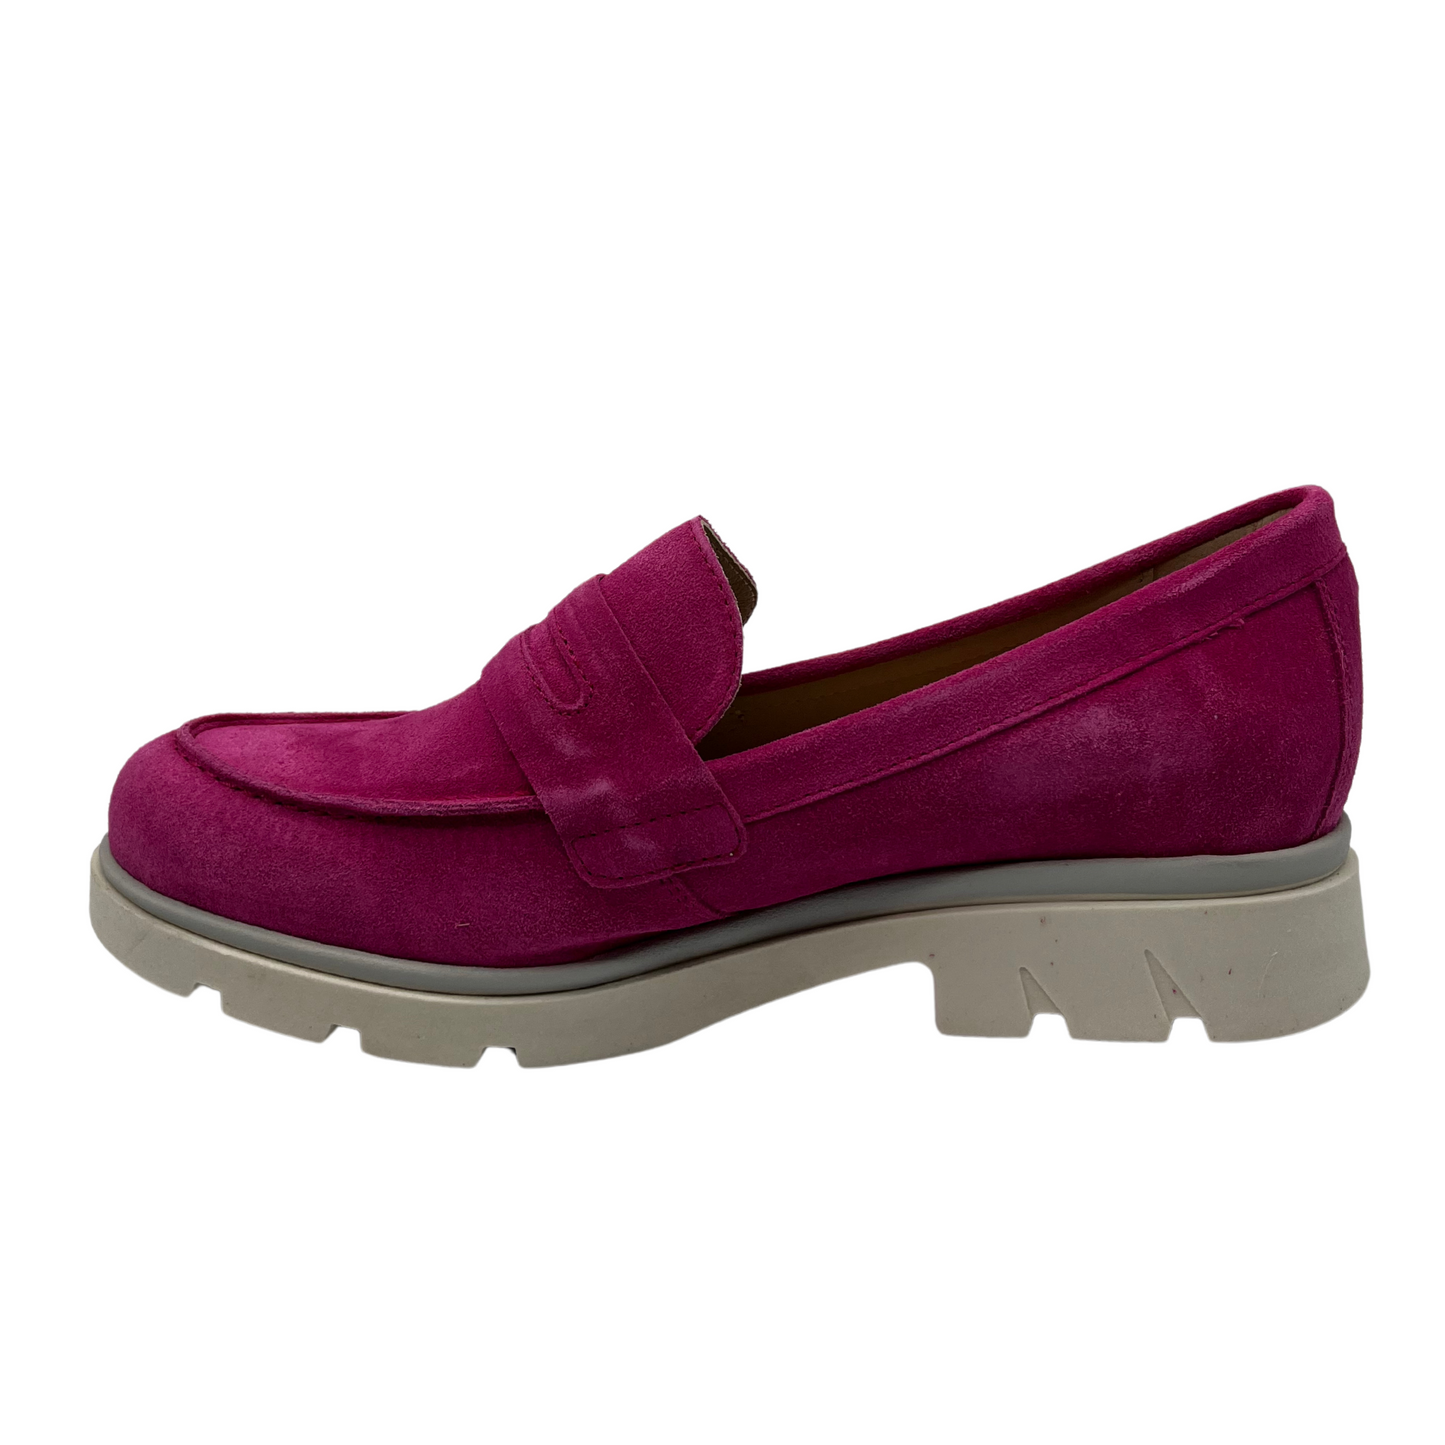 Left facing view of fuchsia loafer with chunky sole and low heel